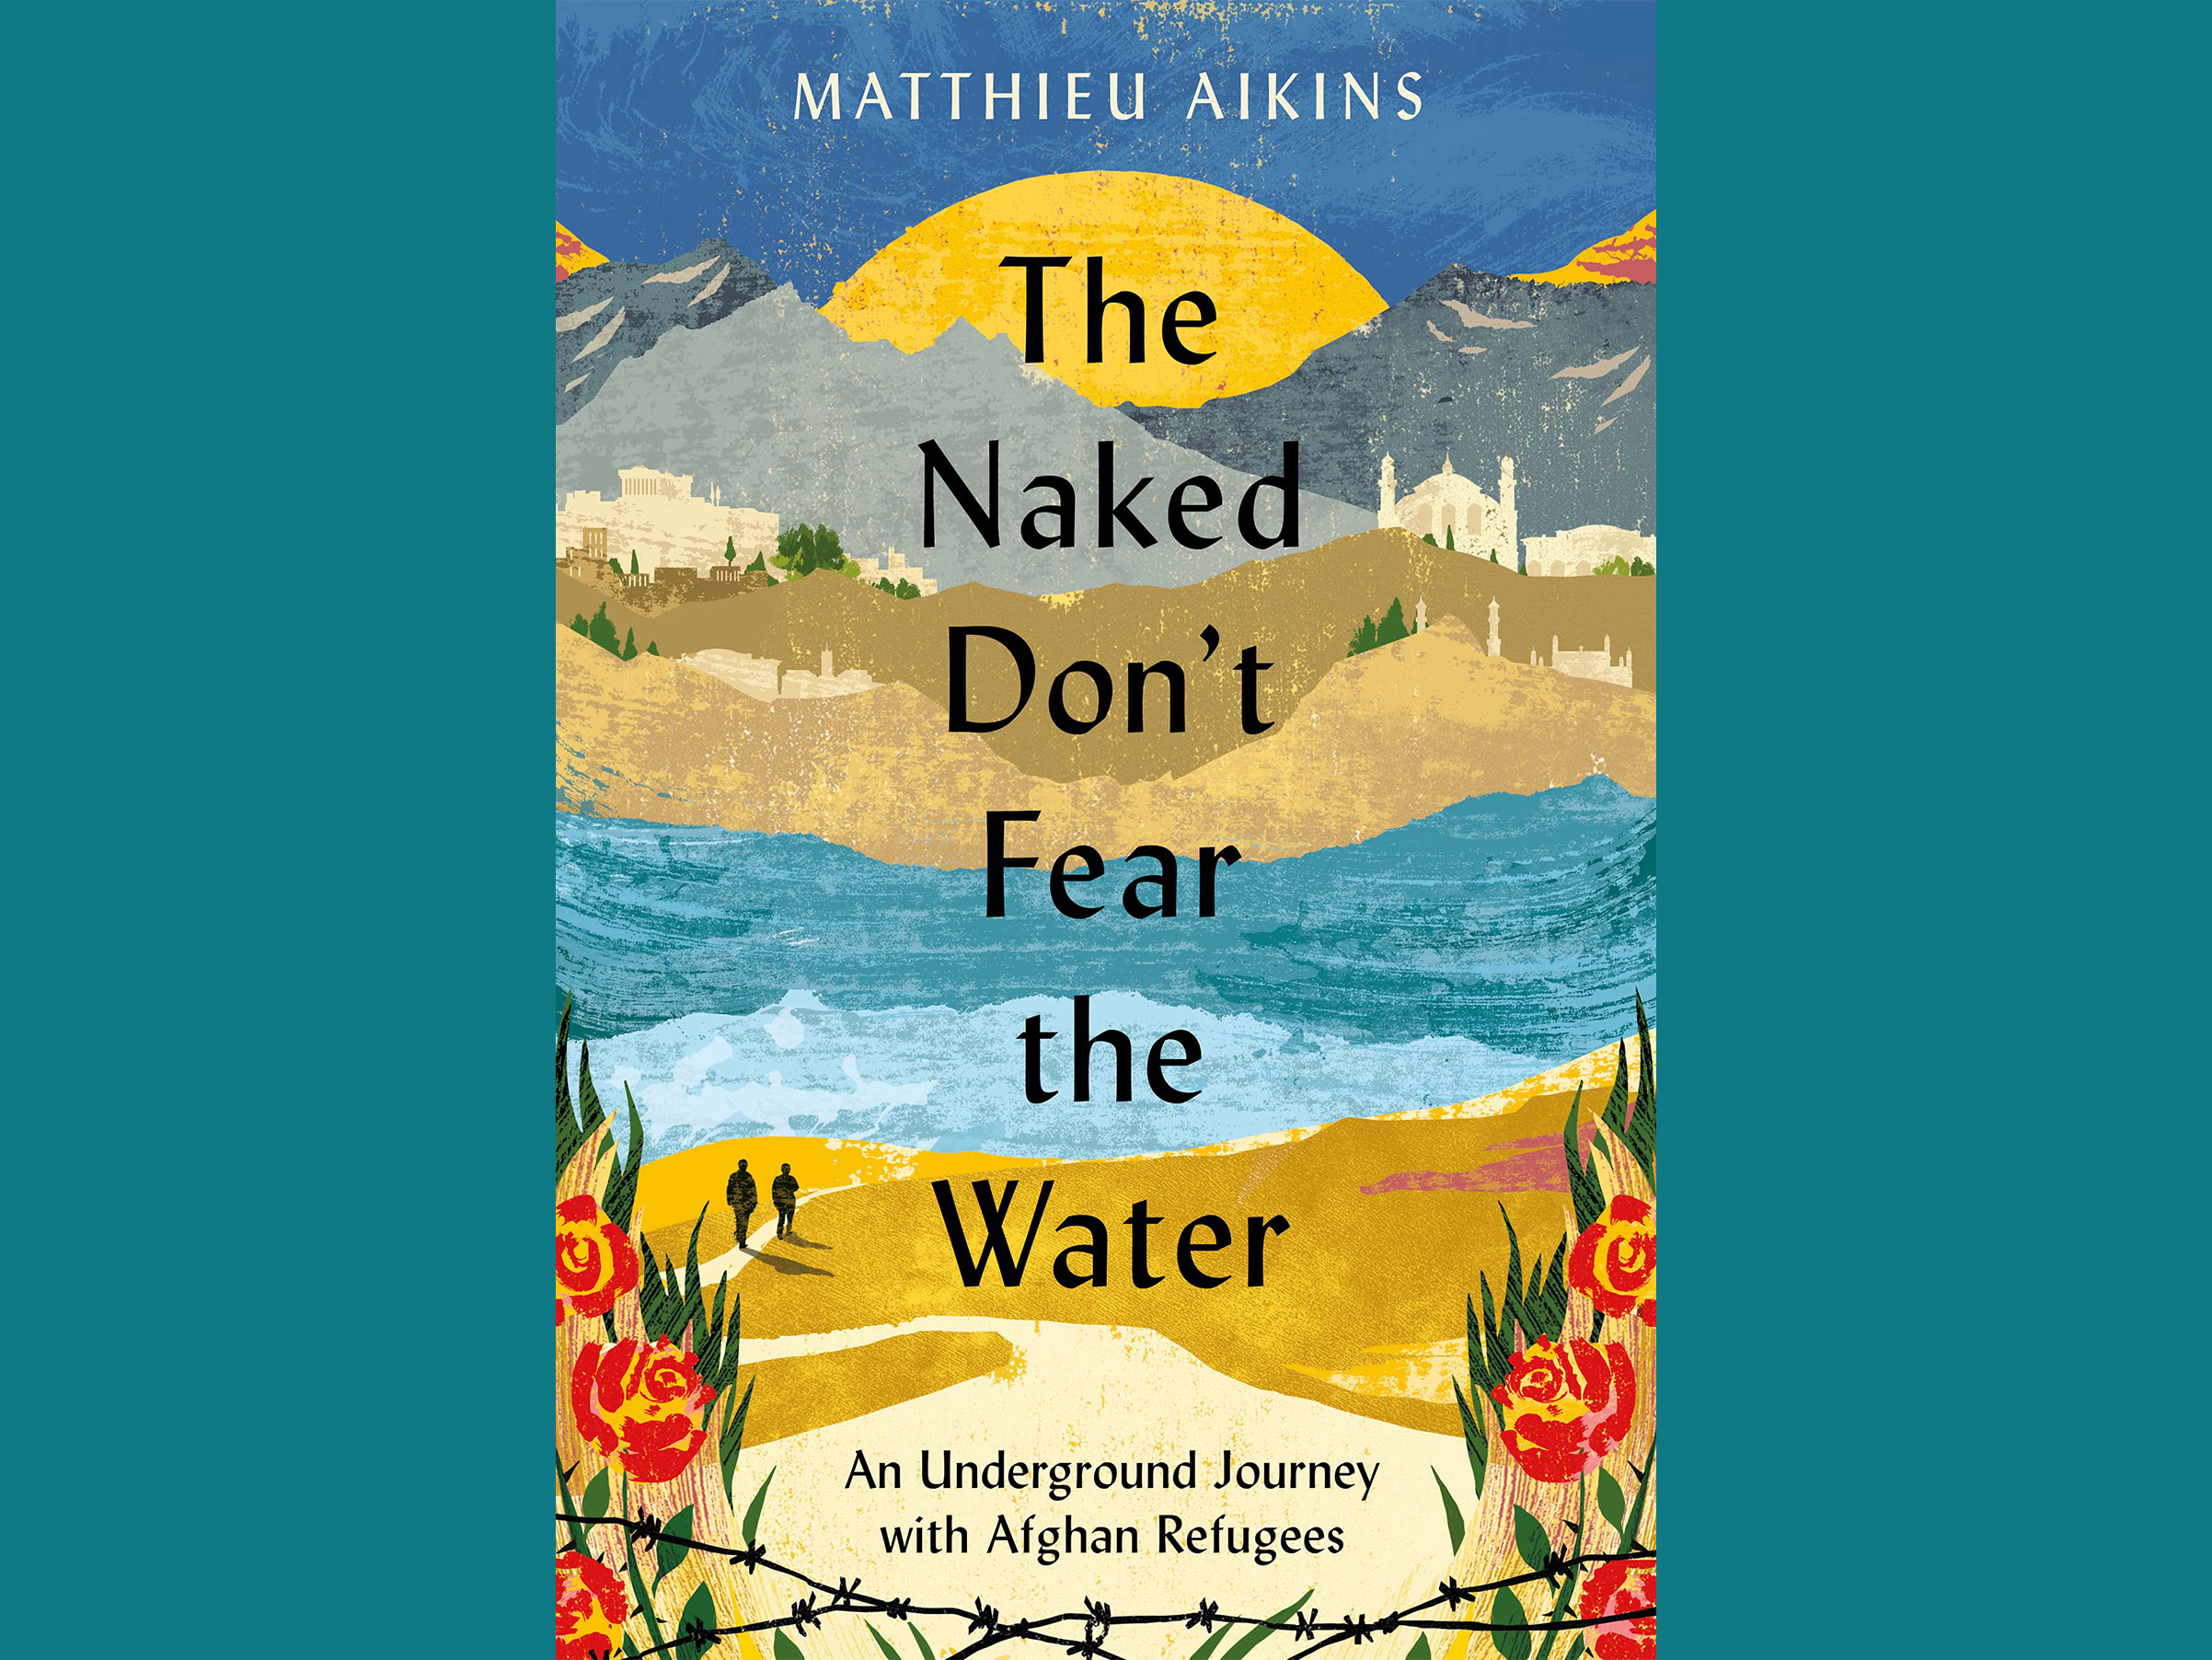 The Naked Don’t Fear the Water: Matthieu Aikins and Taqi Akhlaqi on Flight from Afghanistan